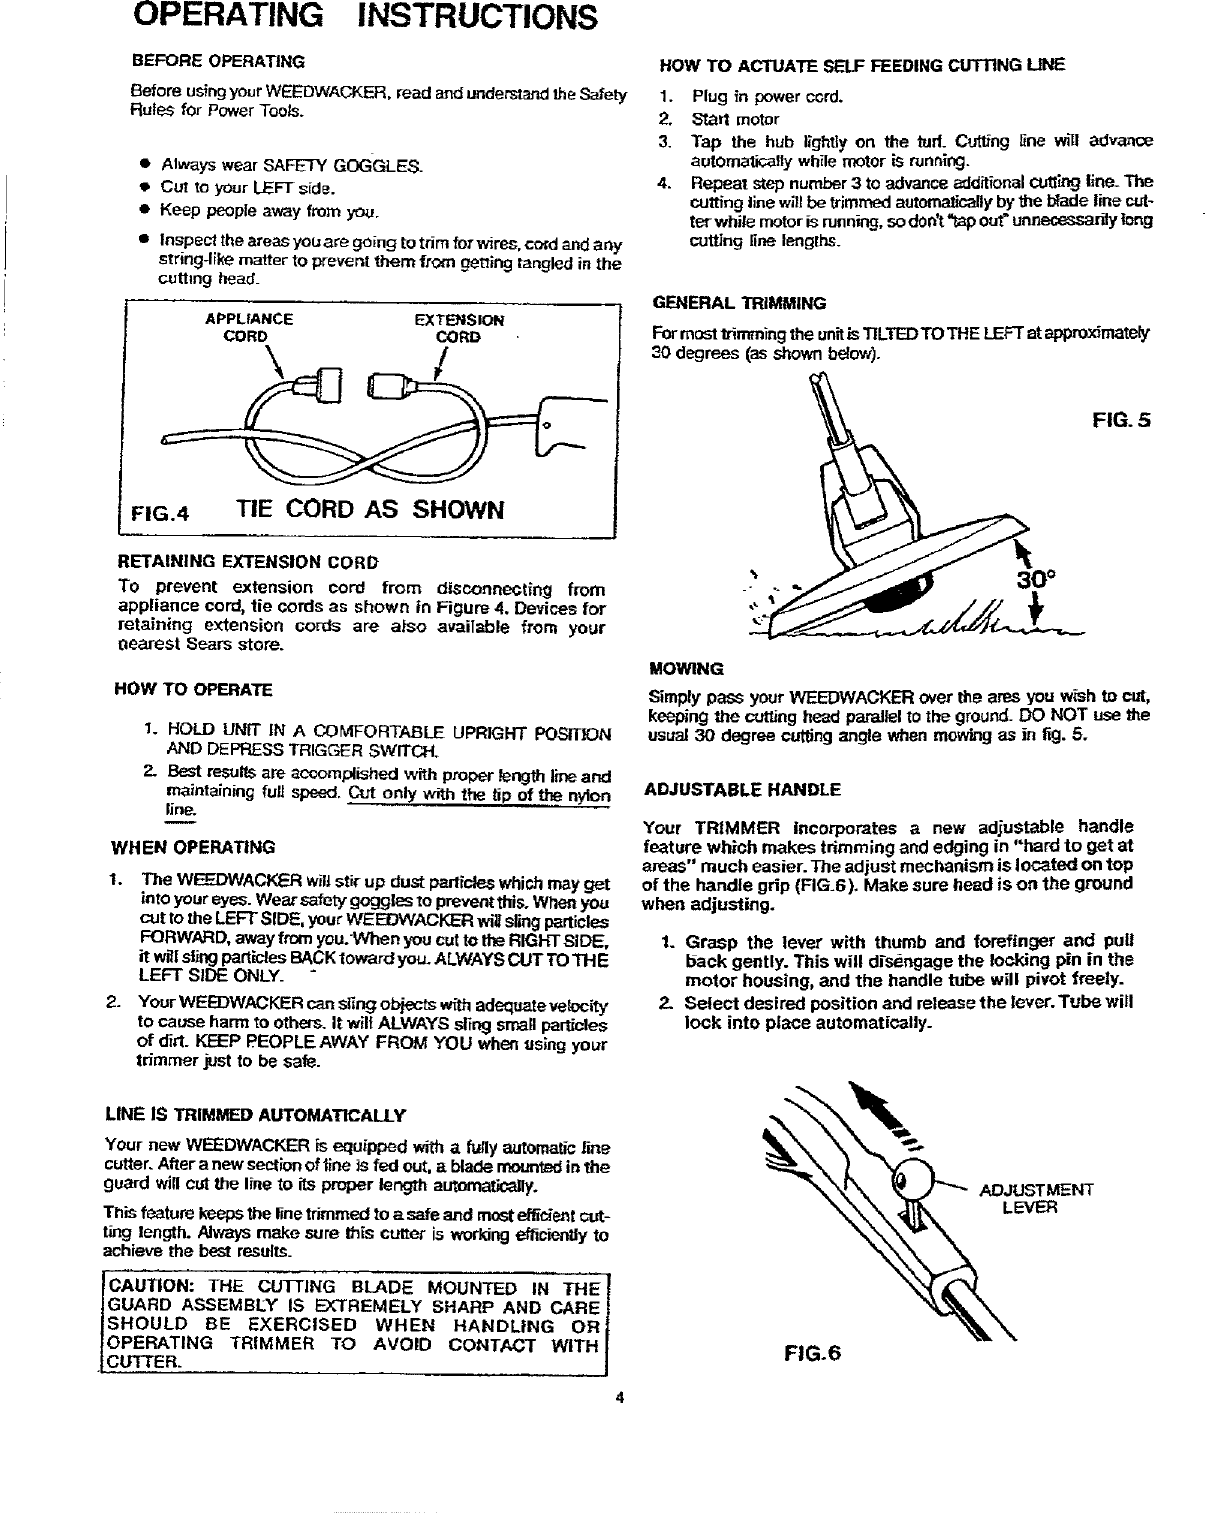 Page 4 of 8 - Craftsman 257796041 User Manual  ADJUSTABLE HANDLE WEED AND GRASS TRIMMER - Manuals Guides L0707268